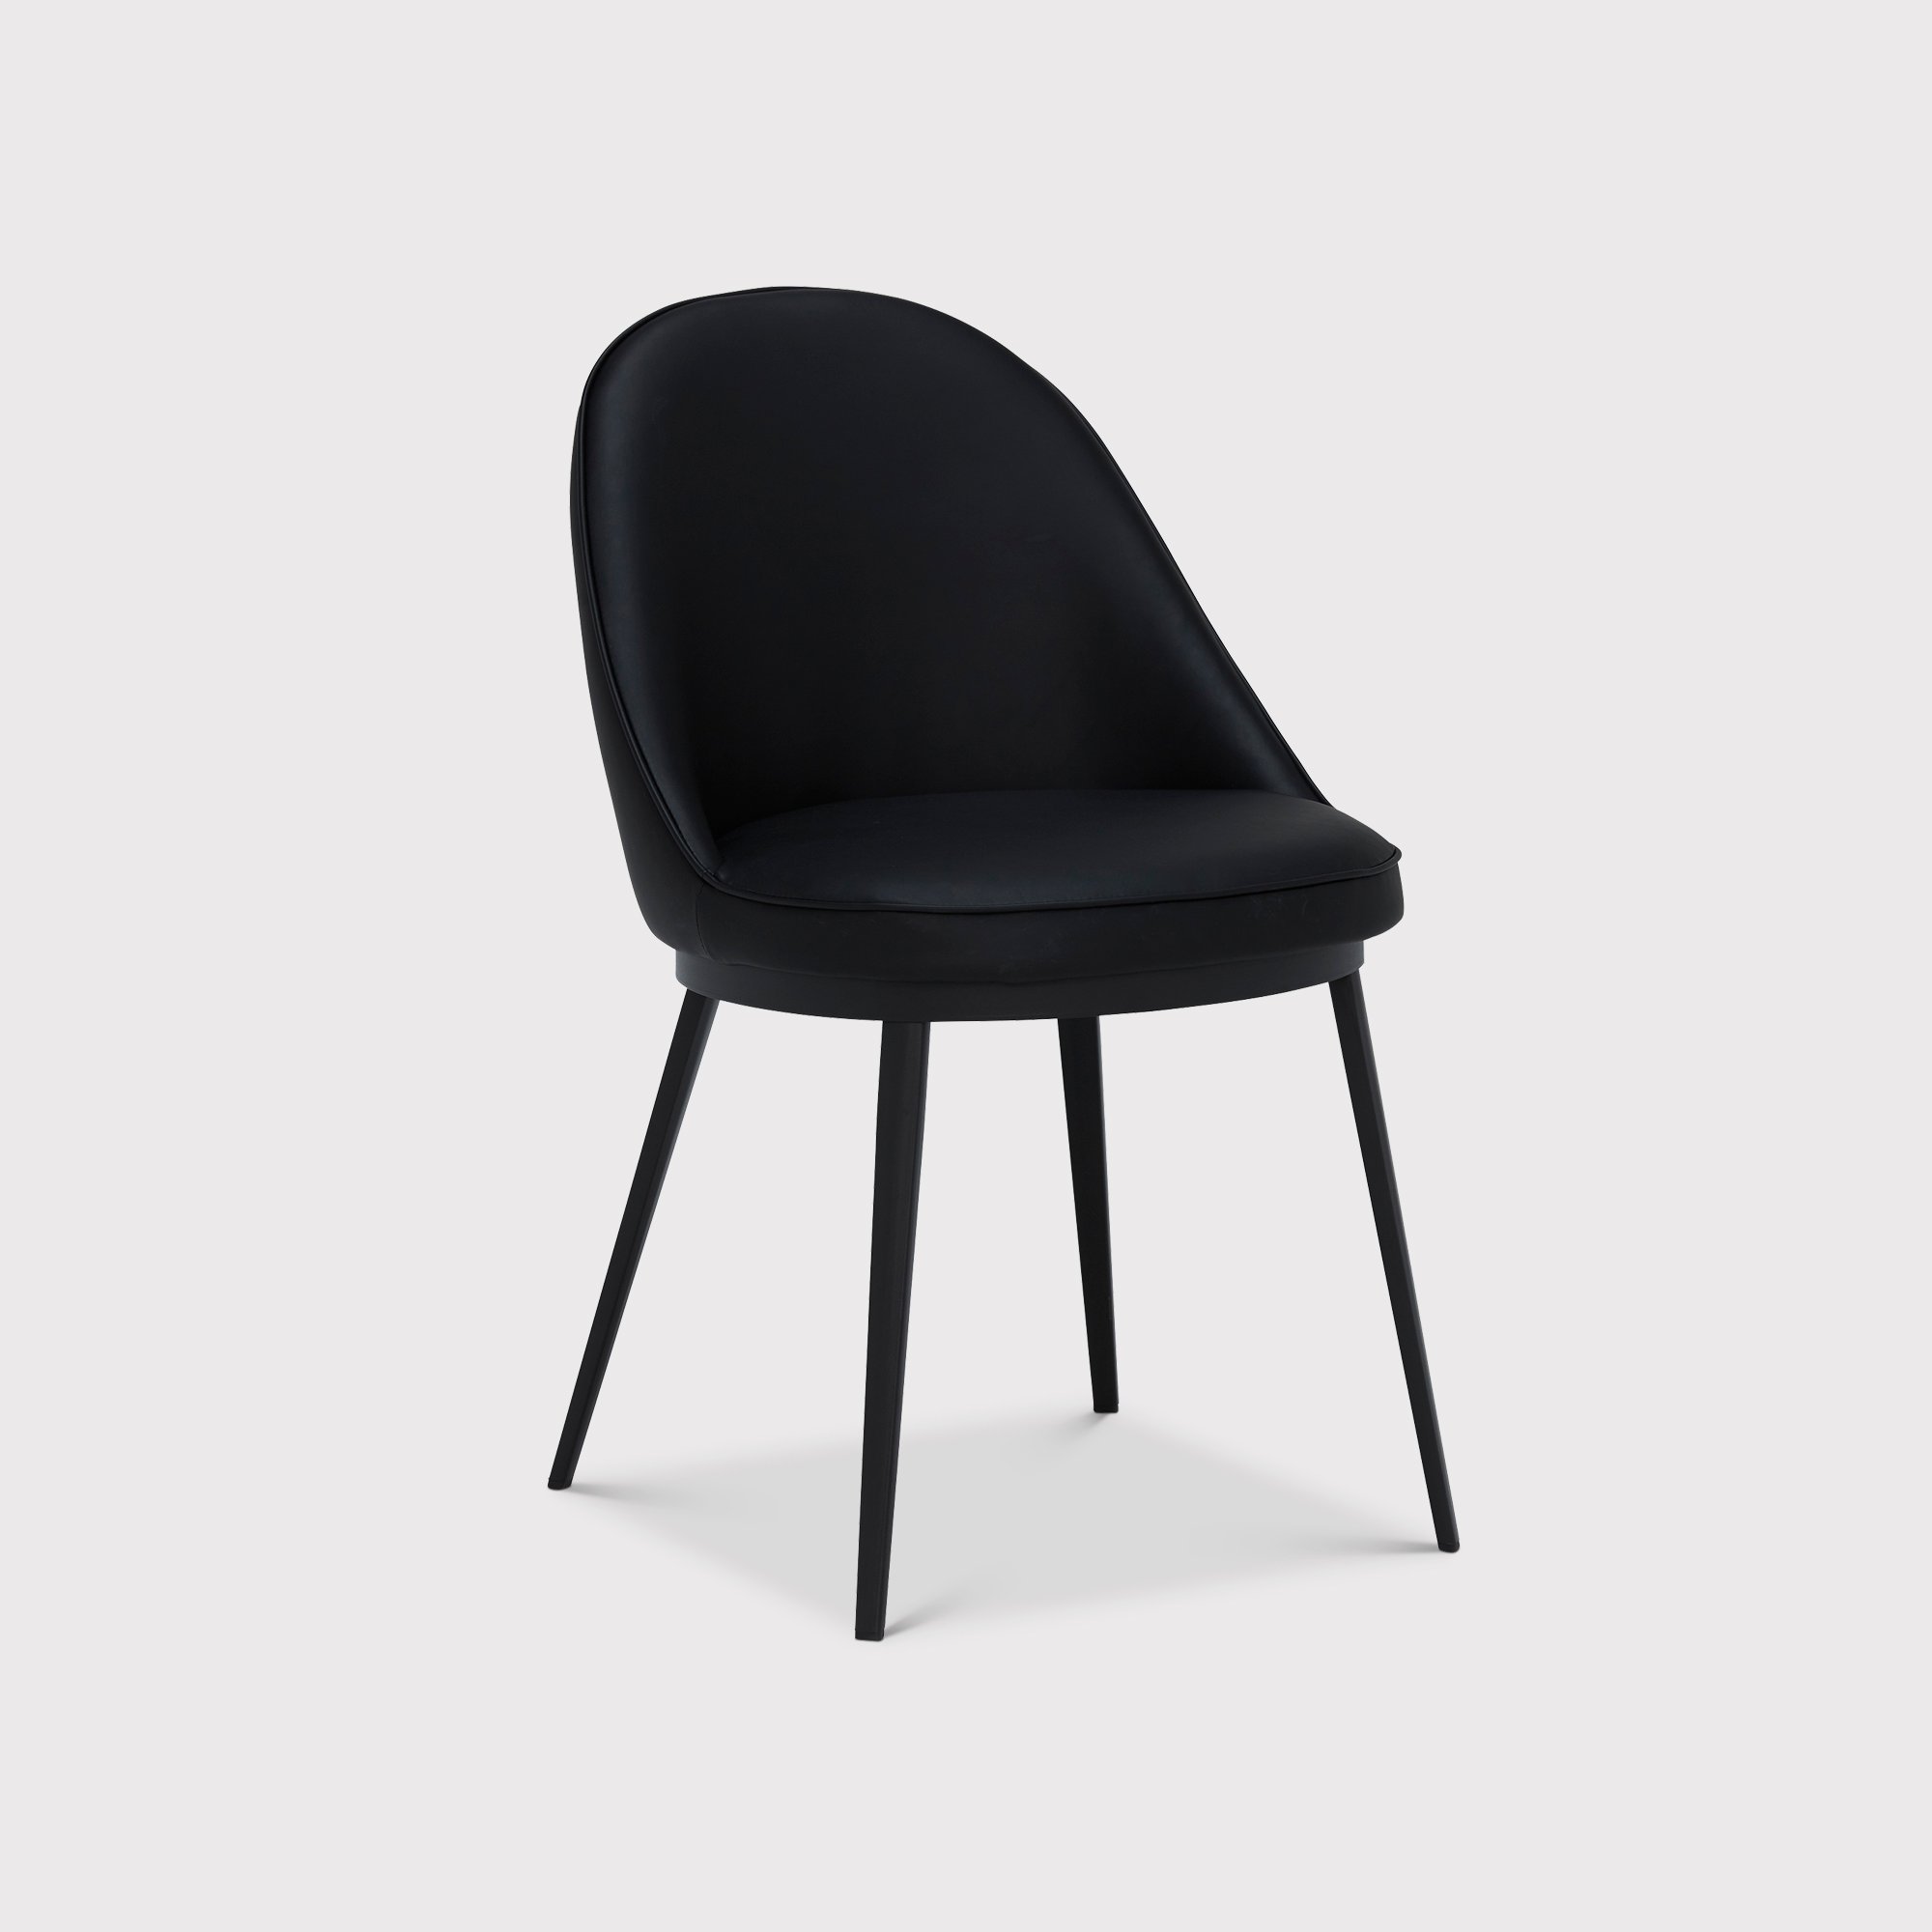 Quebec Dining Chair, Black | Barker & Stonehouse